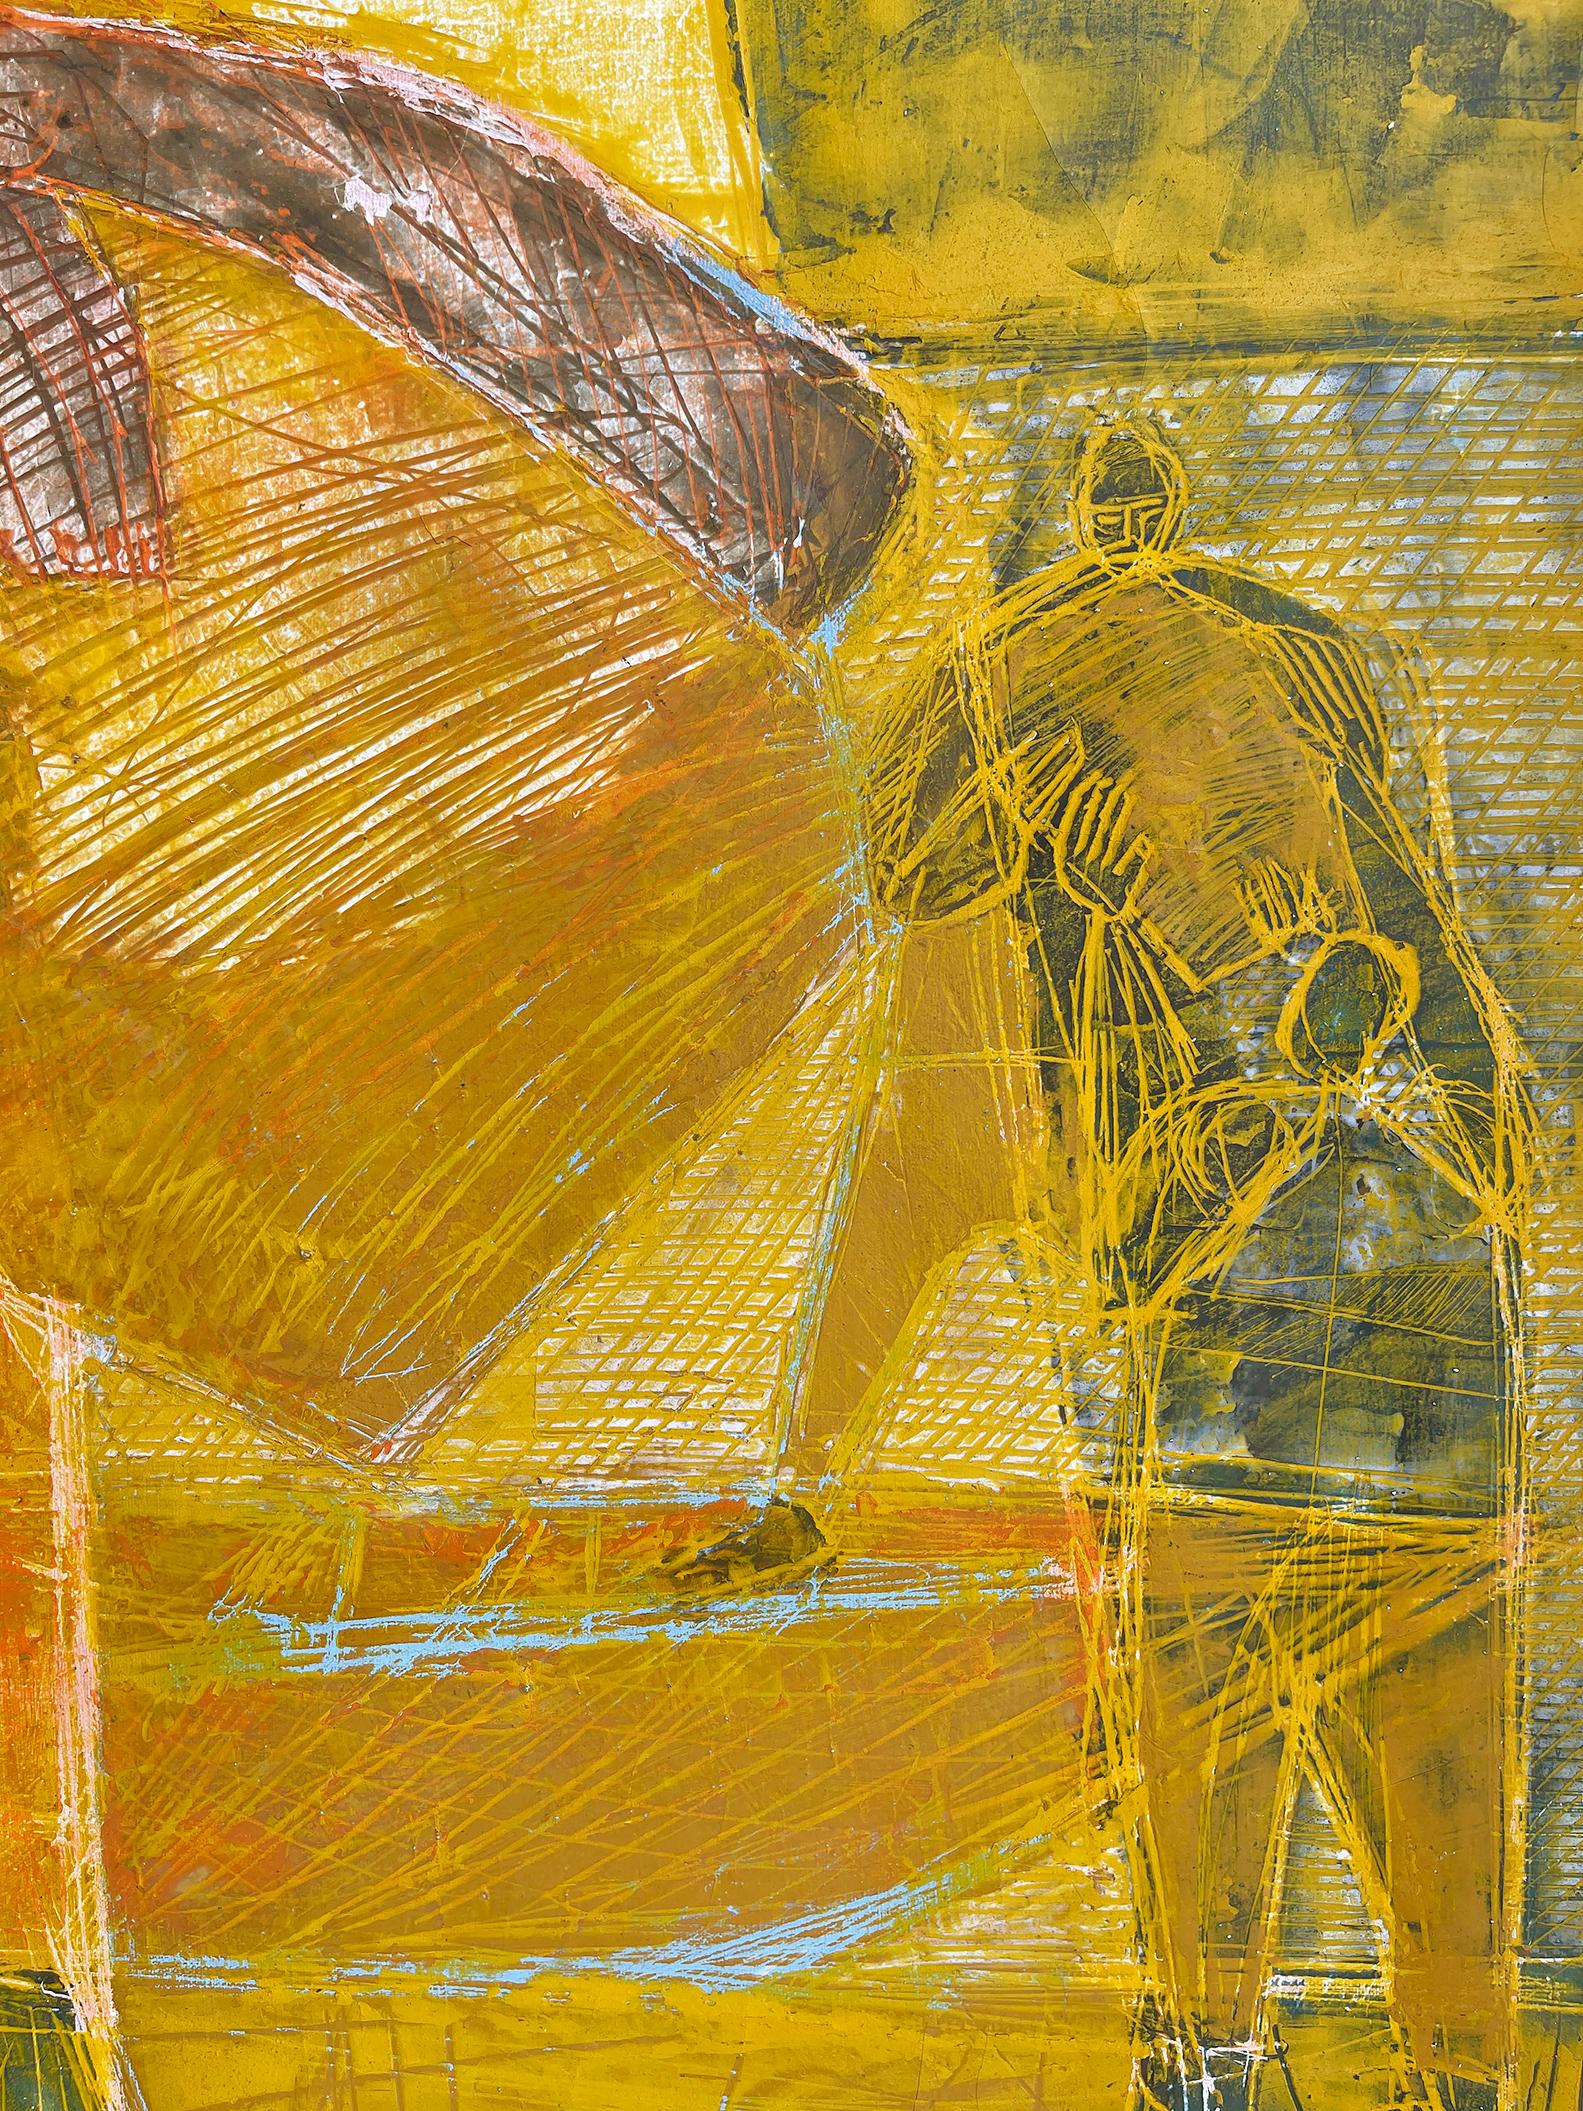 Yellow Ship with Workers Unloading  - Caribbean Art - Encaustic - Painting by Sacha Thebaud Tebo